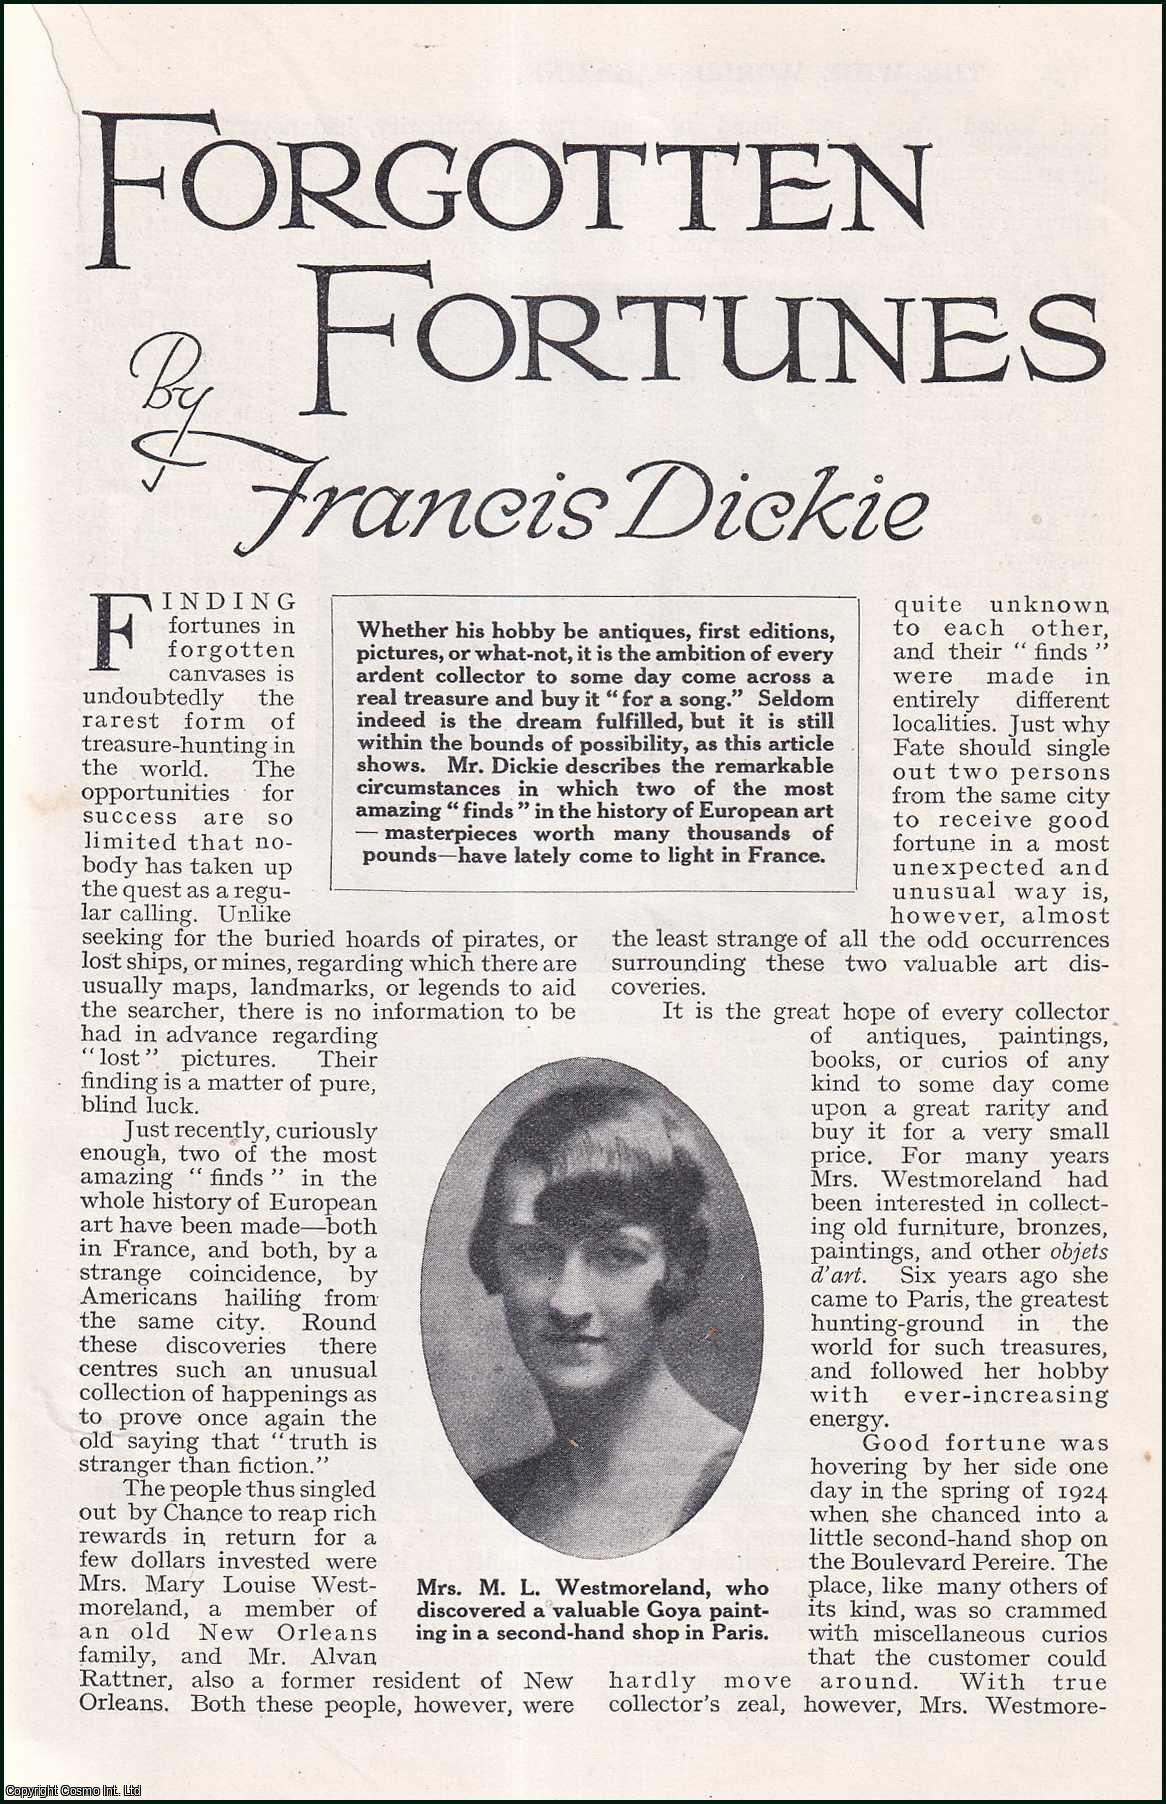 Francis Dickie - Forgotten Fortunes : Paul Gauguin's primitive of Joan of Arc, which was painted on a brick wall & hidden under layers of paper for forty years & the Goya painting discovered by Mrs. Westmoreland. Finding fortunes in forgotten canvases. An uncommon original article from the Wide World Magazine, 1928.